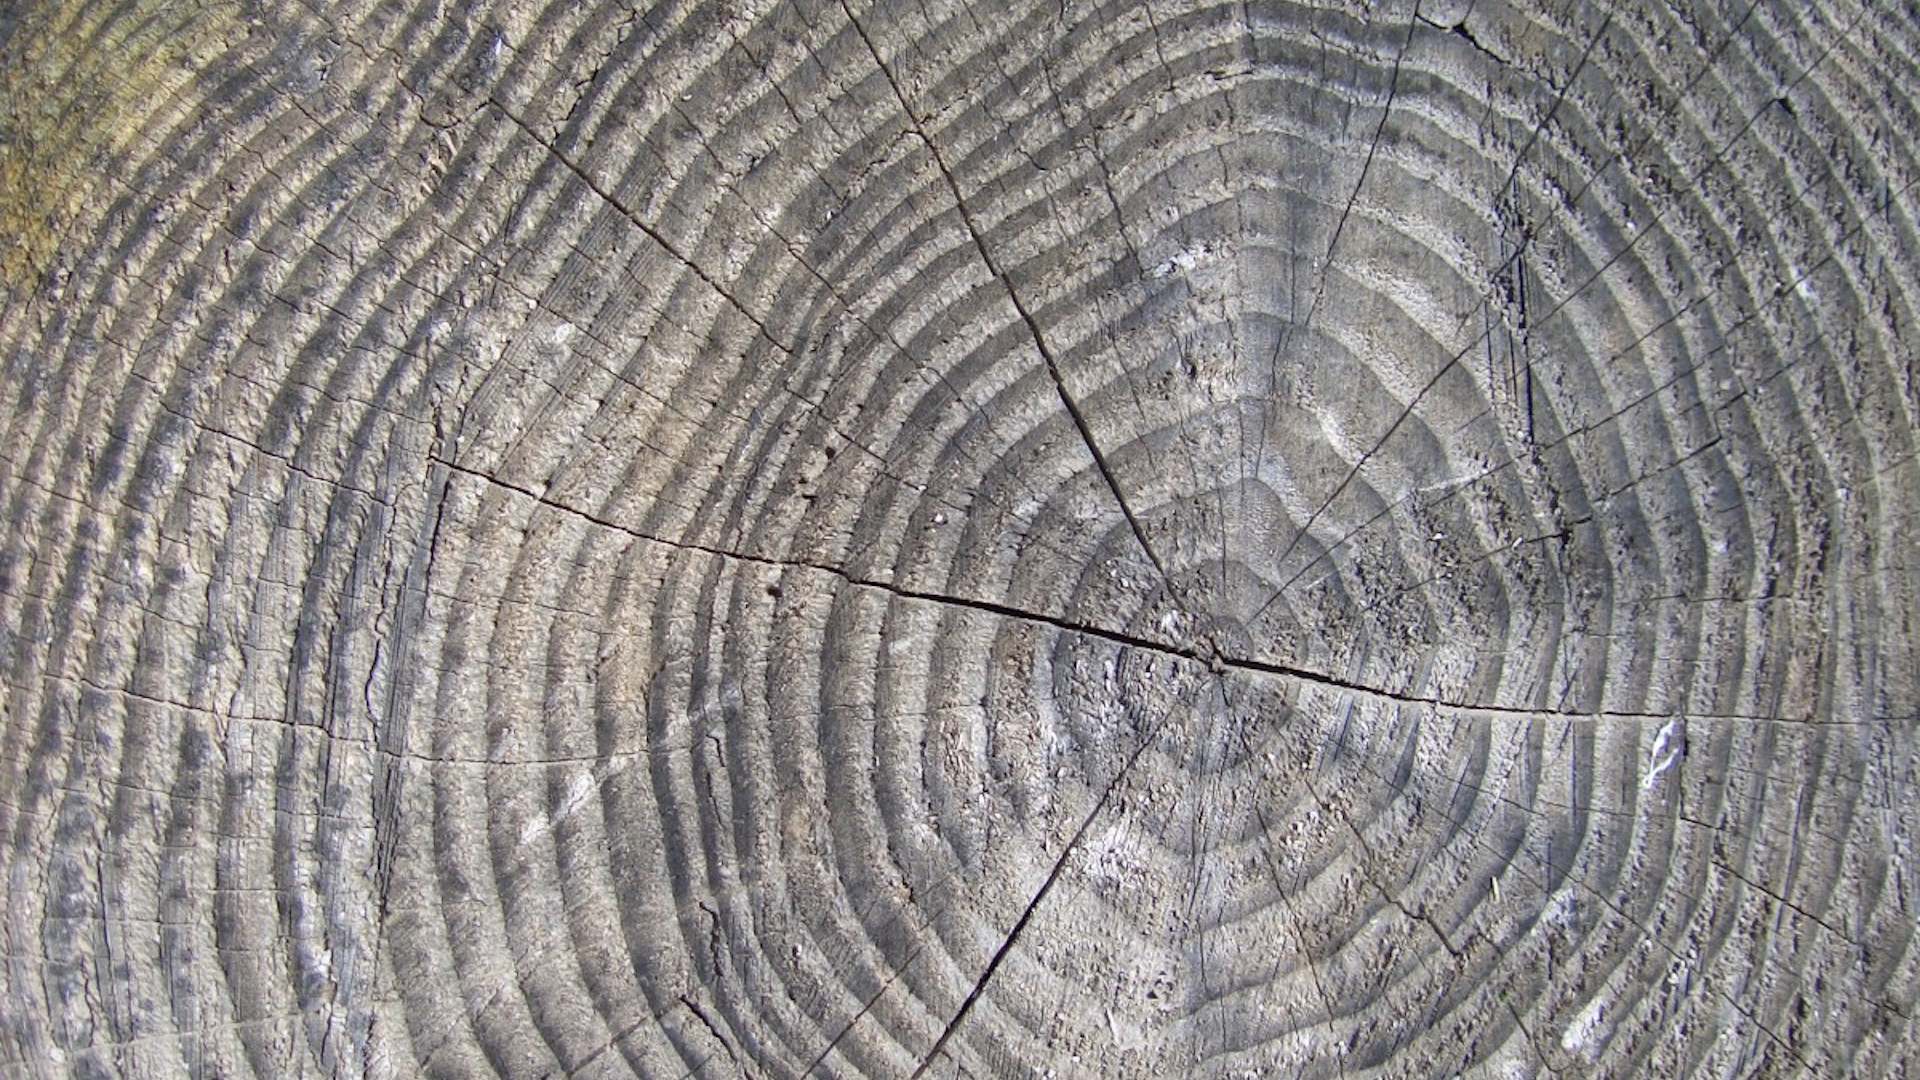 Finding twists in tree ring research.